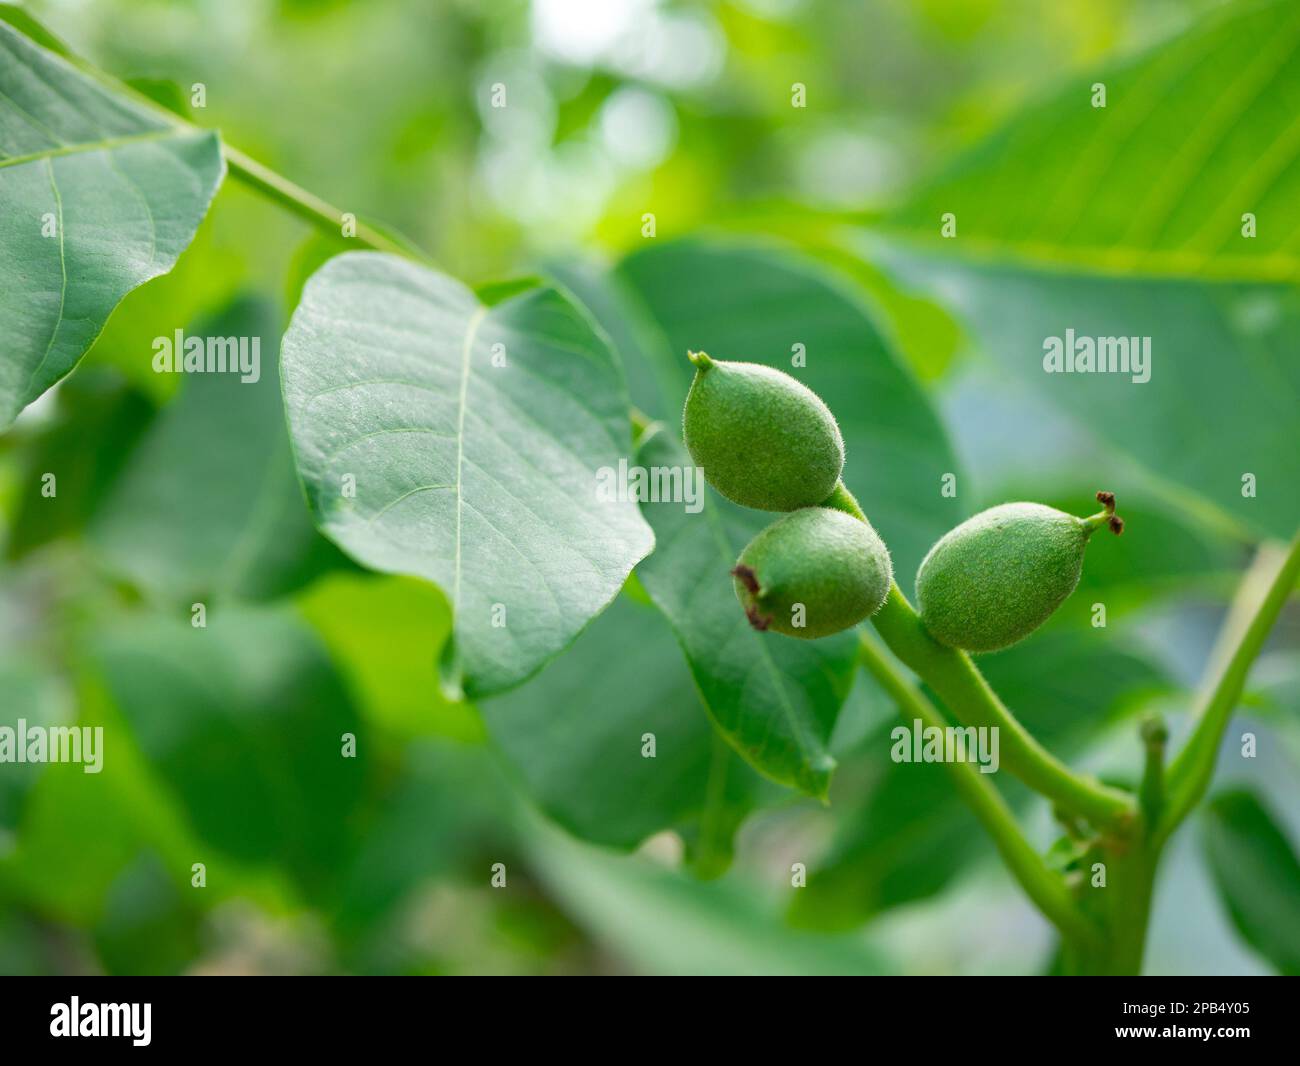 Green ovary fruits of walnuts on a young tree, selective focus. Cultivation of nuts. Juglans regia Stock Photo